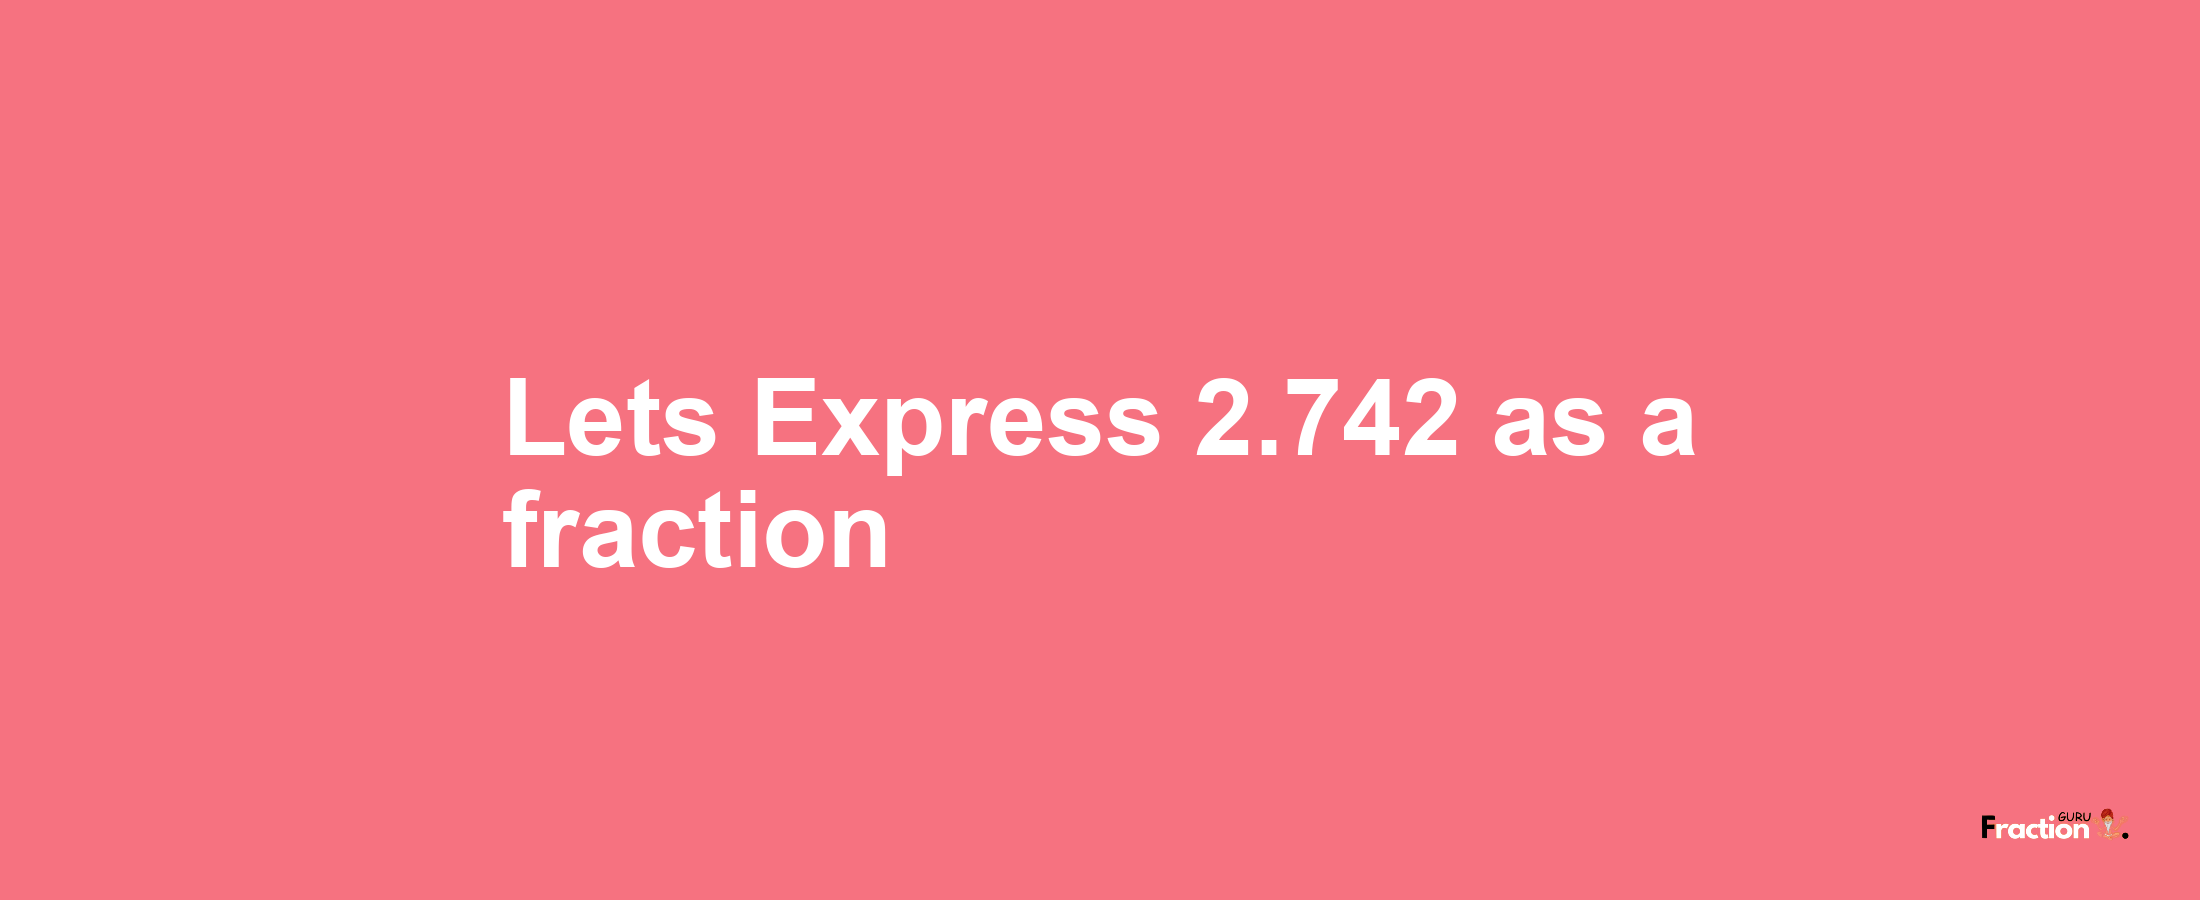 Lets Express 2.742 as afraction